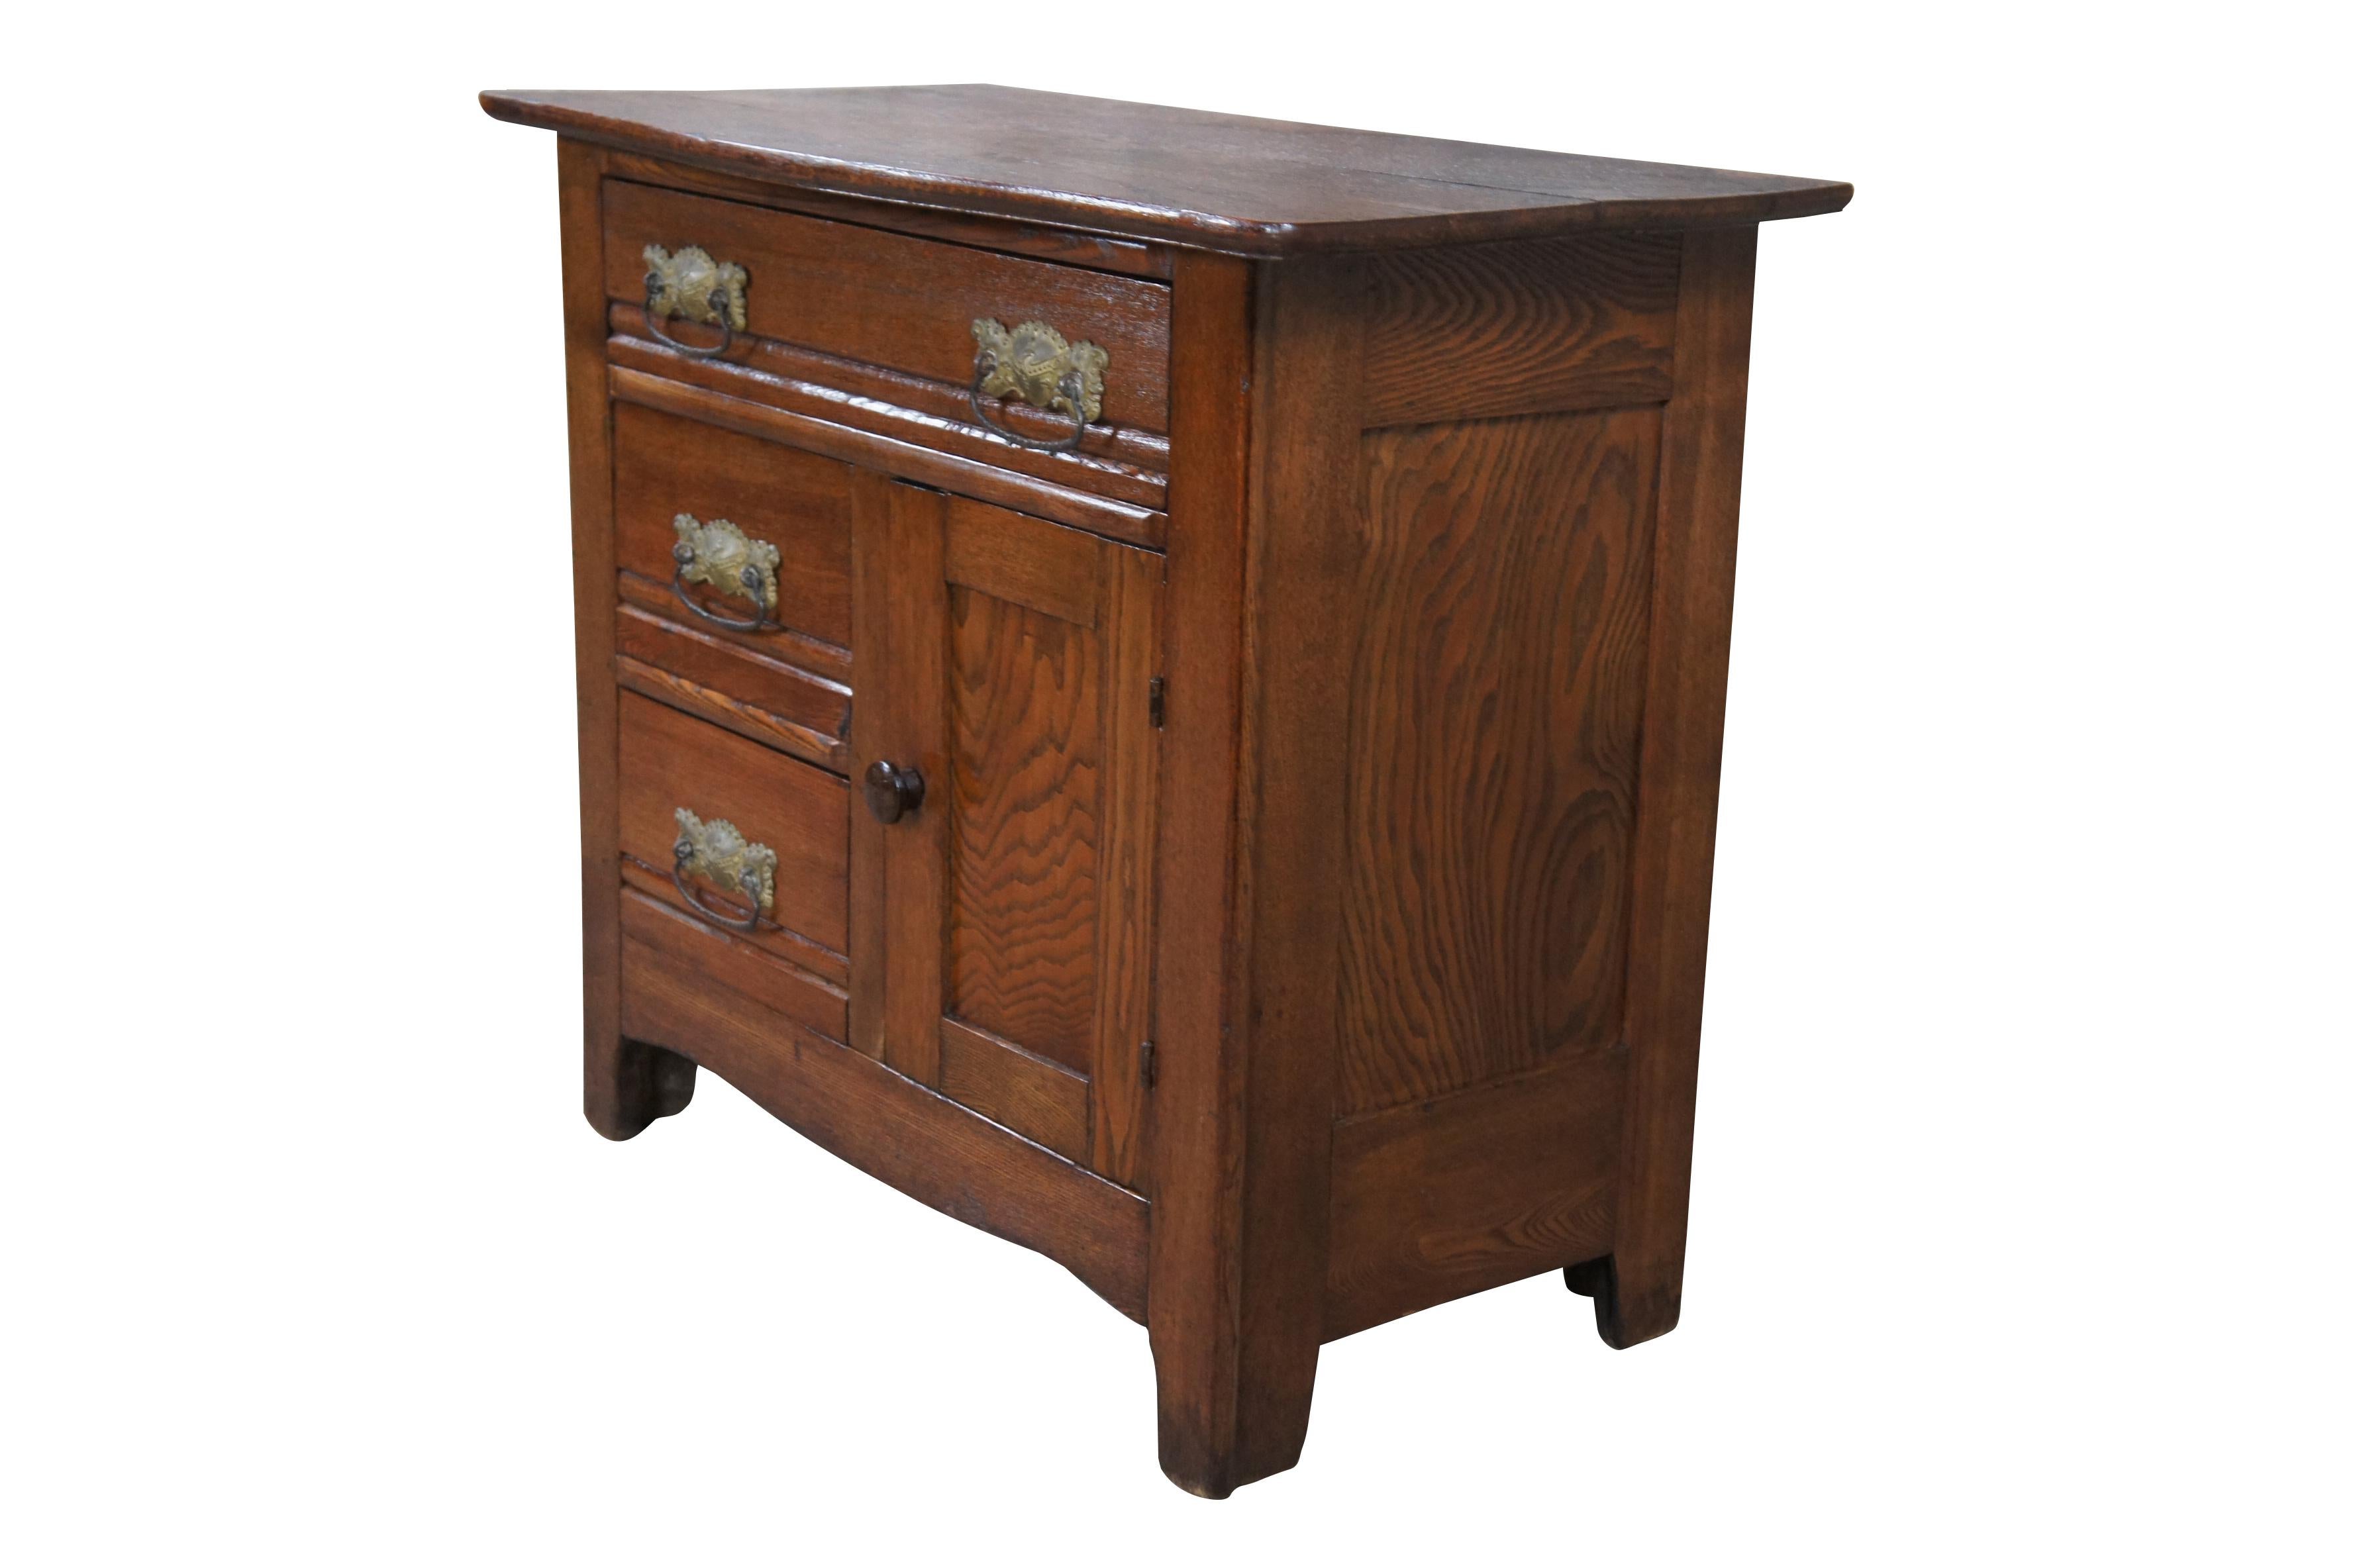 Antique Late Victorian Oak Washstand Cabinet Chest Dresser Nightstand Table In Fair Condition For Sale In Dayton, OH